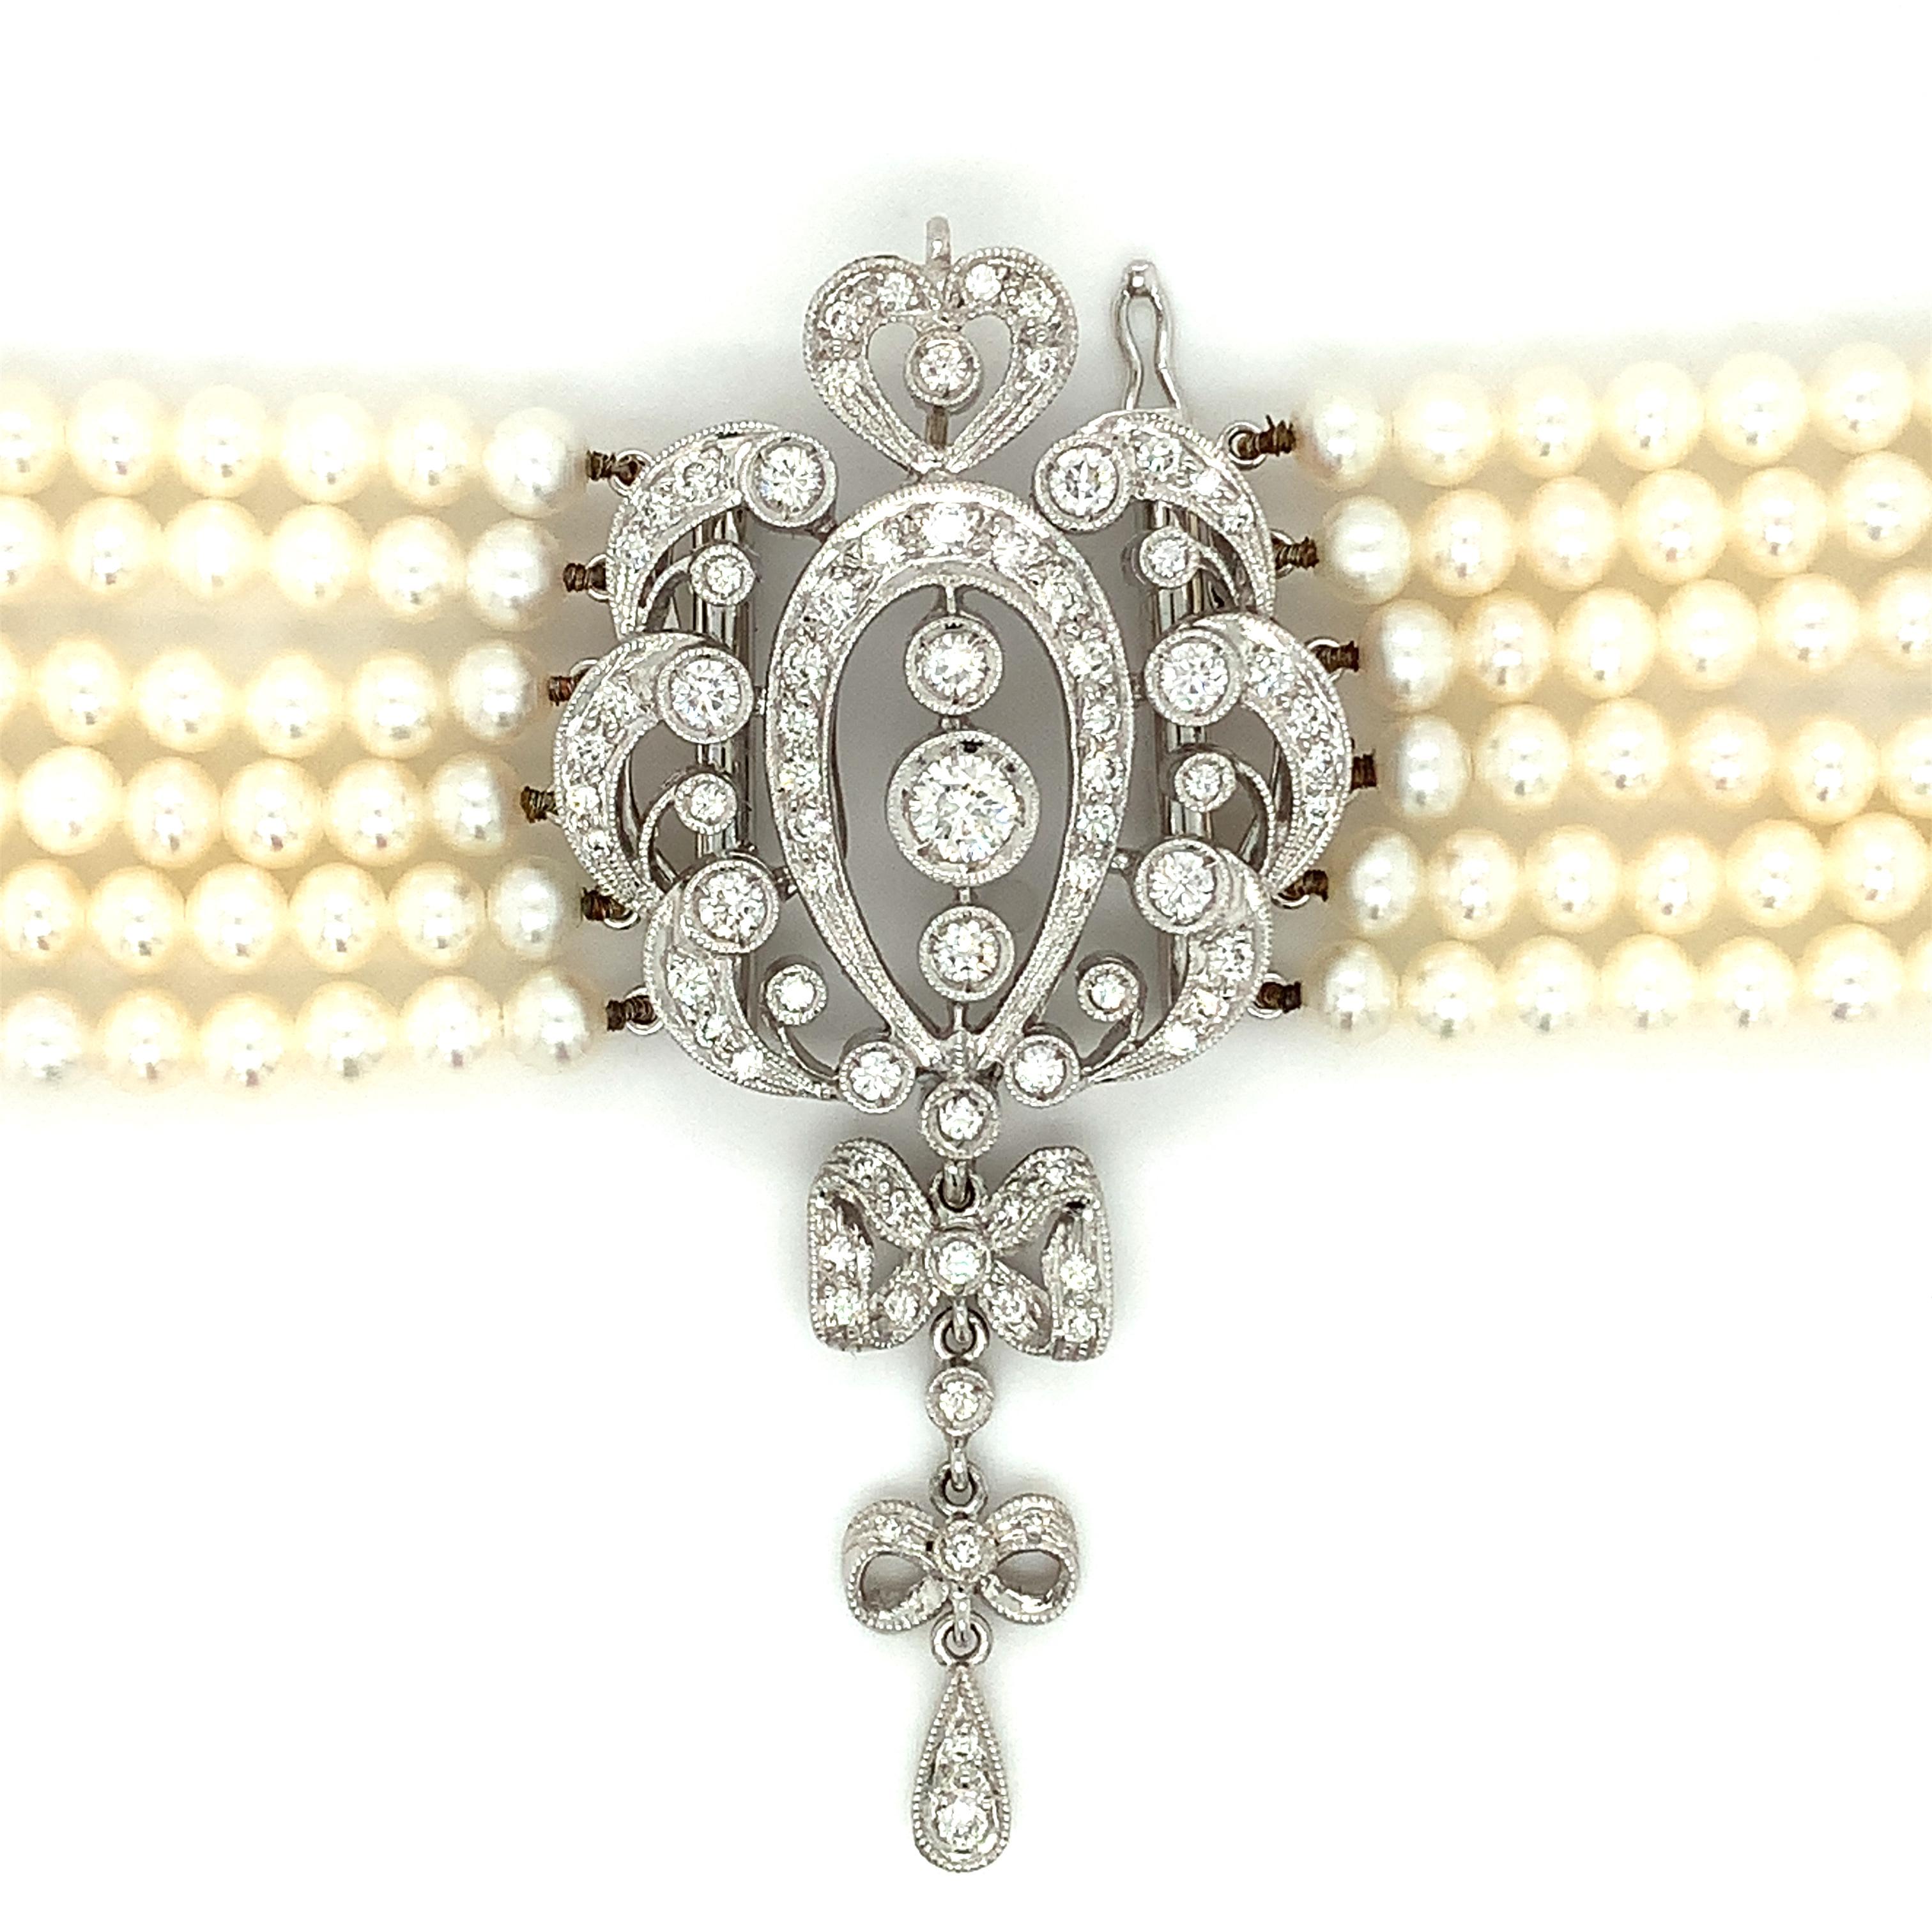 Gorgeous art deco style choker necklace diamonds and pearl 18ct white gold.
Composed of 2.50ct round brilliant diamond and cultured pearls round shaped cream white shade all set in 18ct white gold.
Beautiful choker necklace diamonds accented by